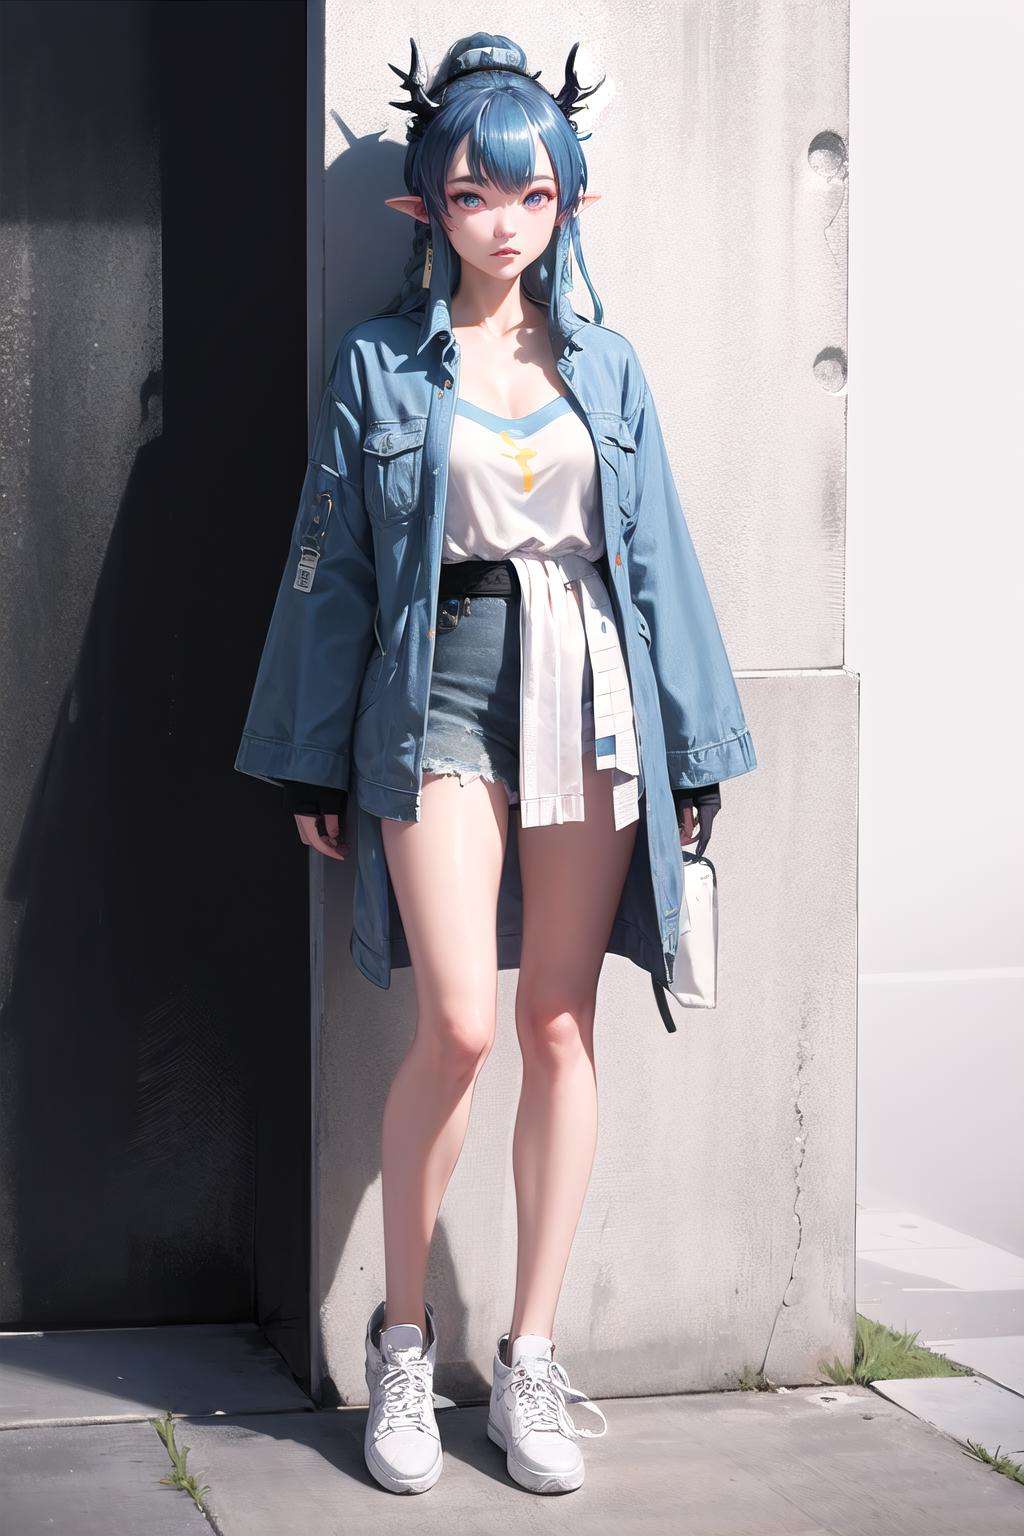 <lora:ak_ling-10:1>,ak_ling,full body, choose a casual and minimalist t-shirt dress in a solid color, styled with white sneakers and a denim jacket tied around the waist, for an easygoing and versatile look